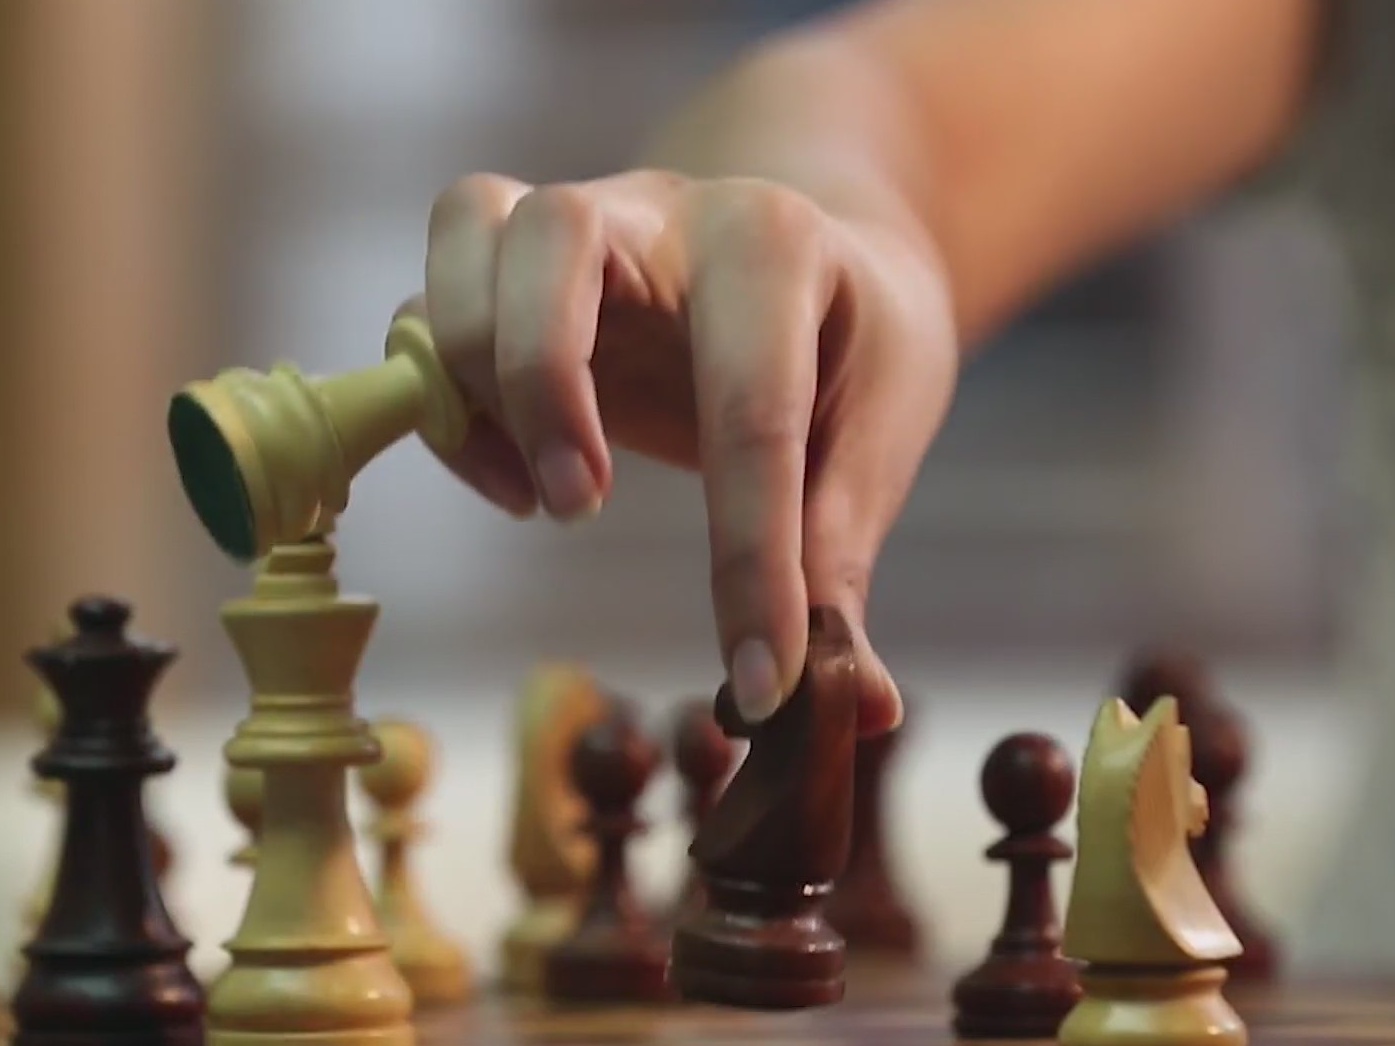 The Chess Hotel - Your Romance at Chess